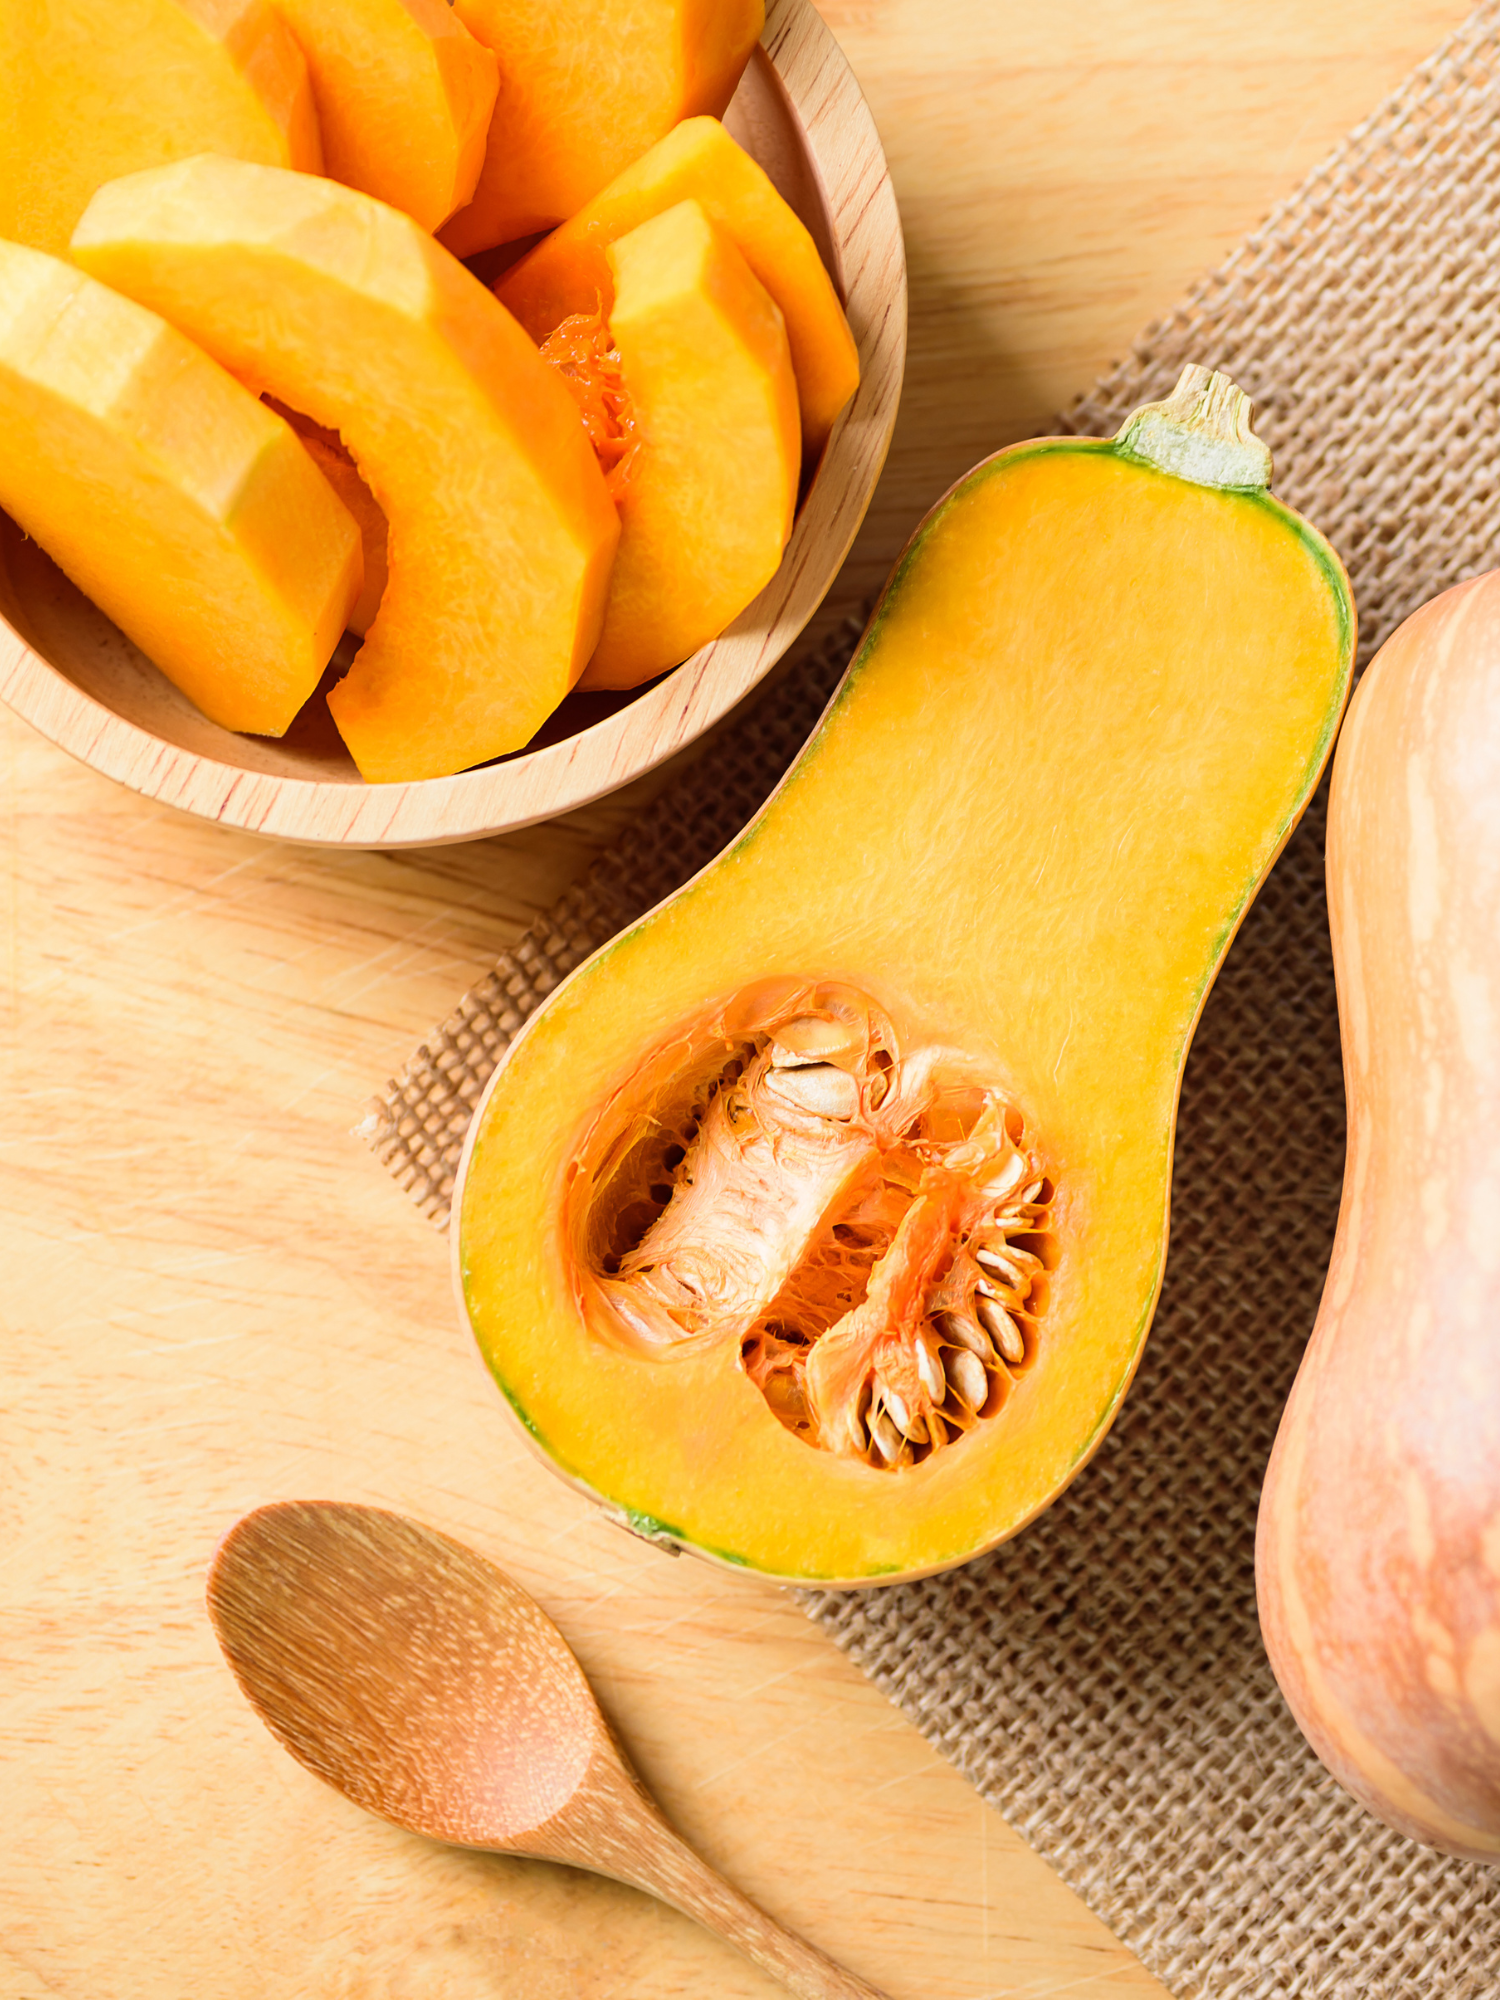 a butternut squash cut in half on a wooden table with a wooden spoon and a bowl of sliced butternut squash pieces